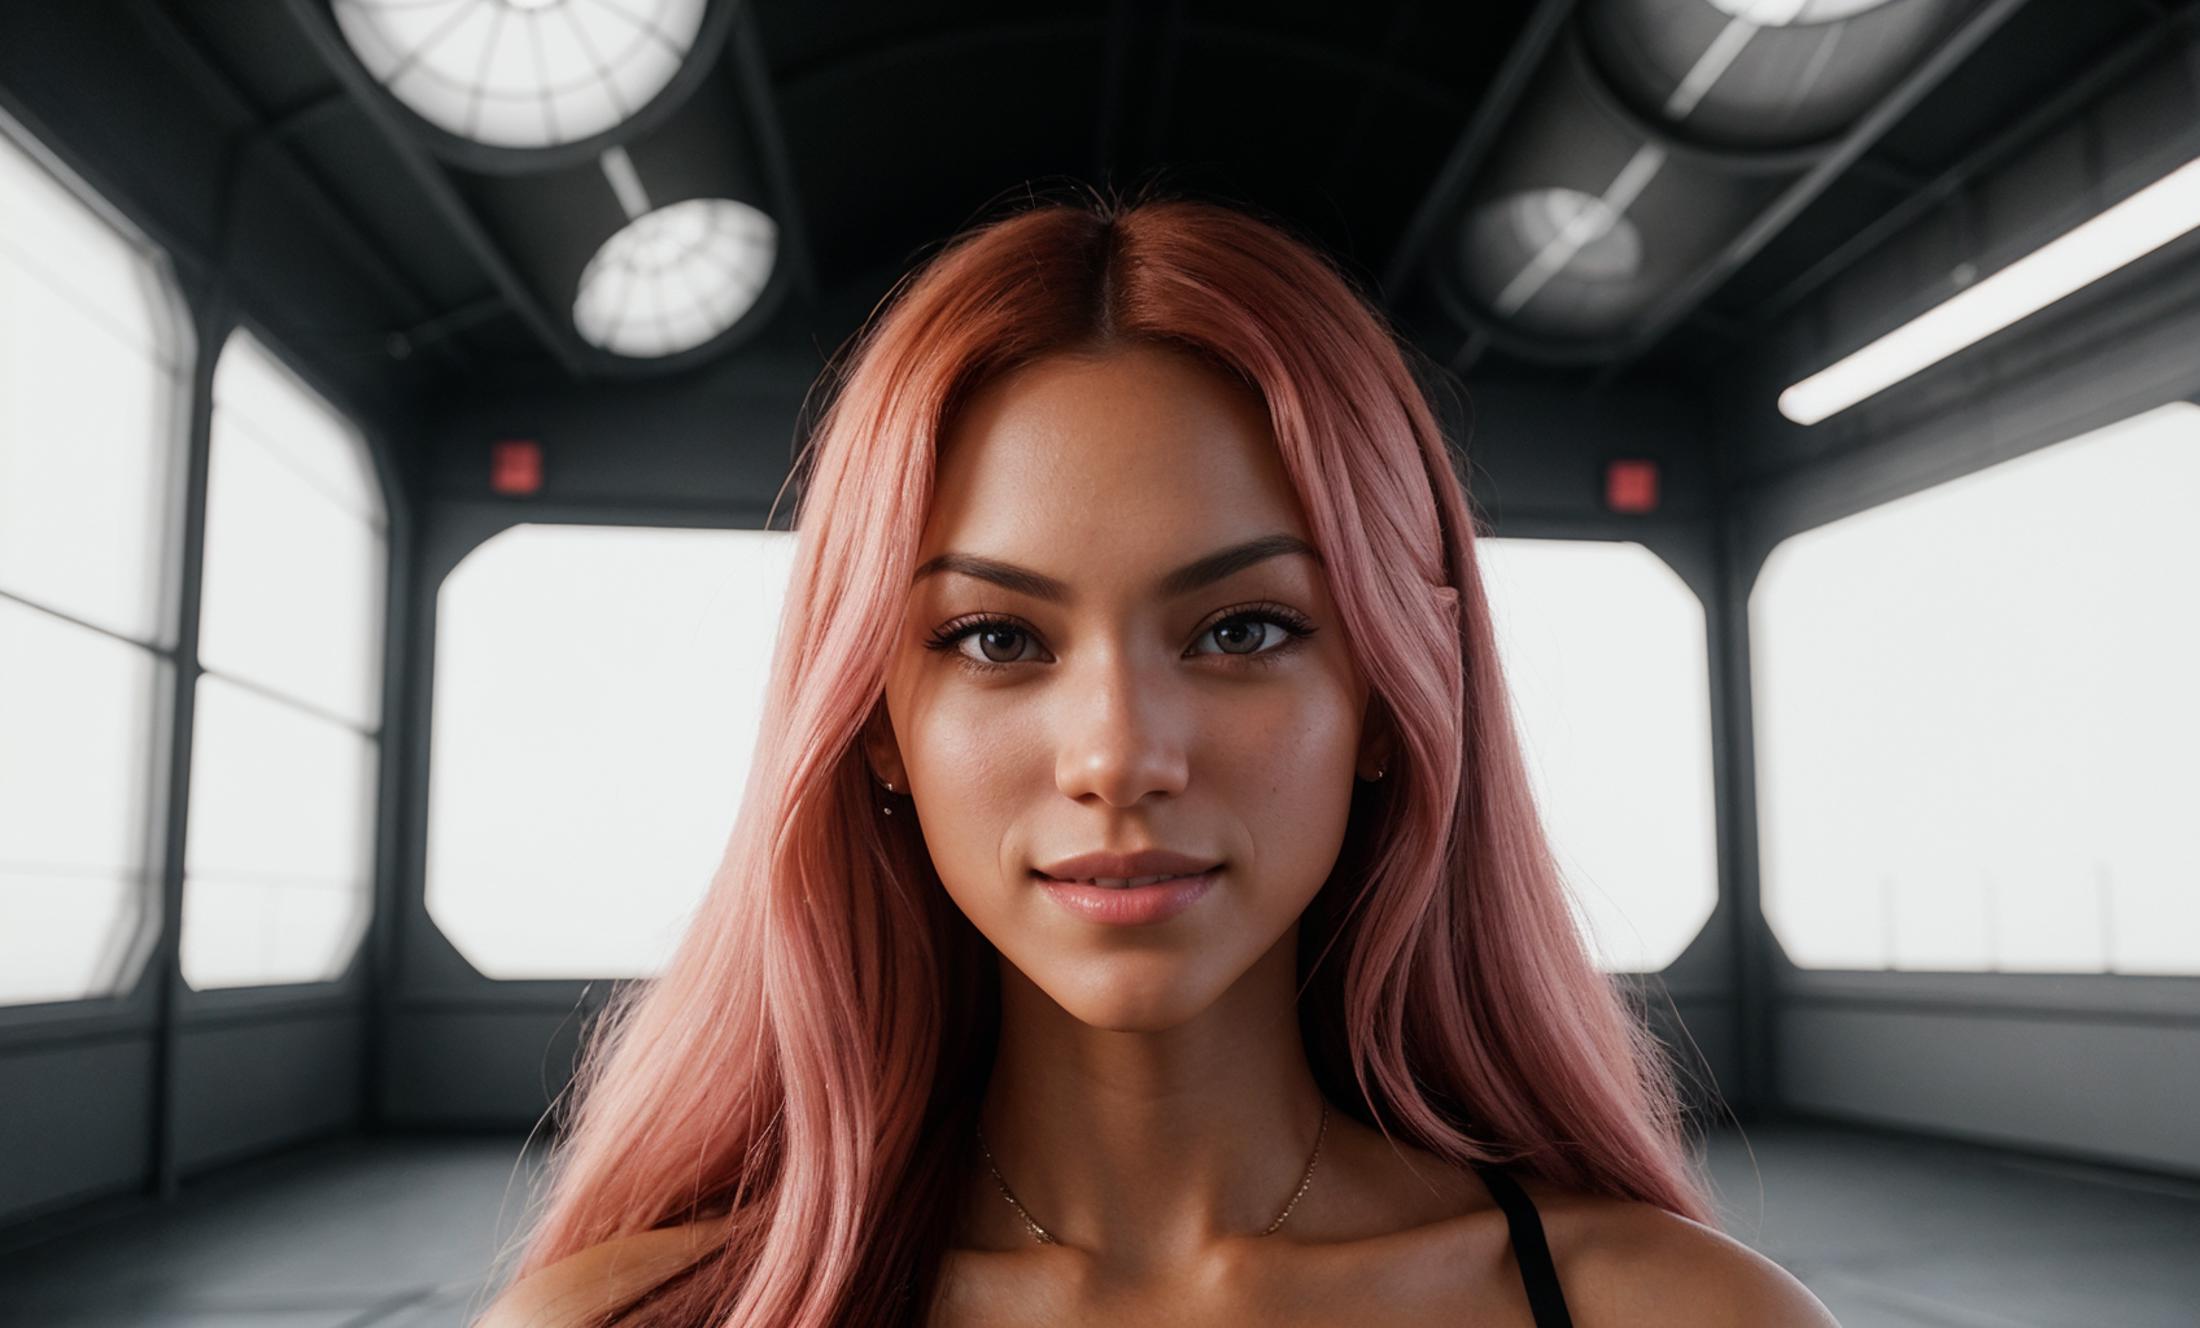 AI model image by Tower13Studios